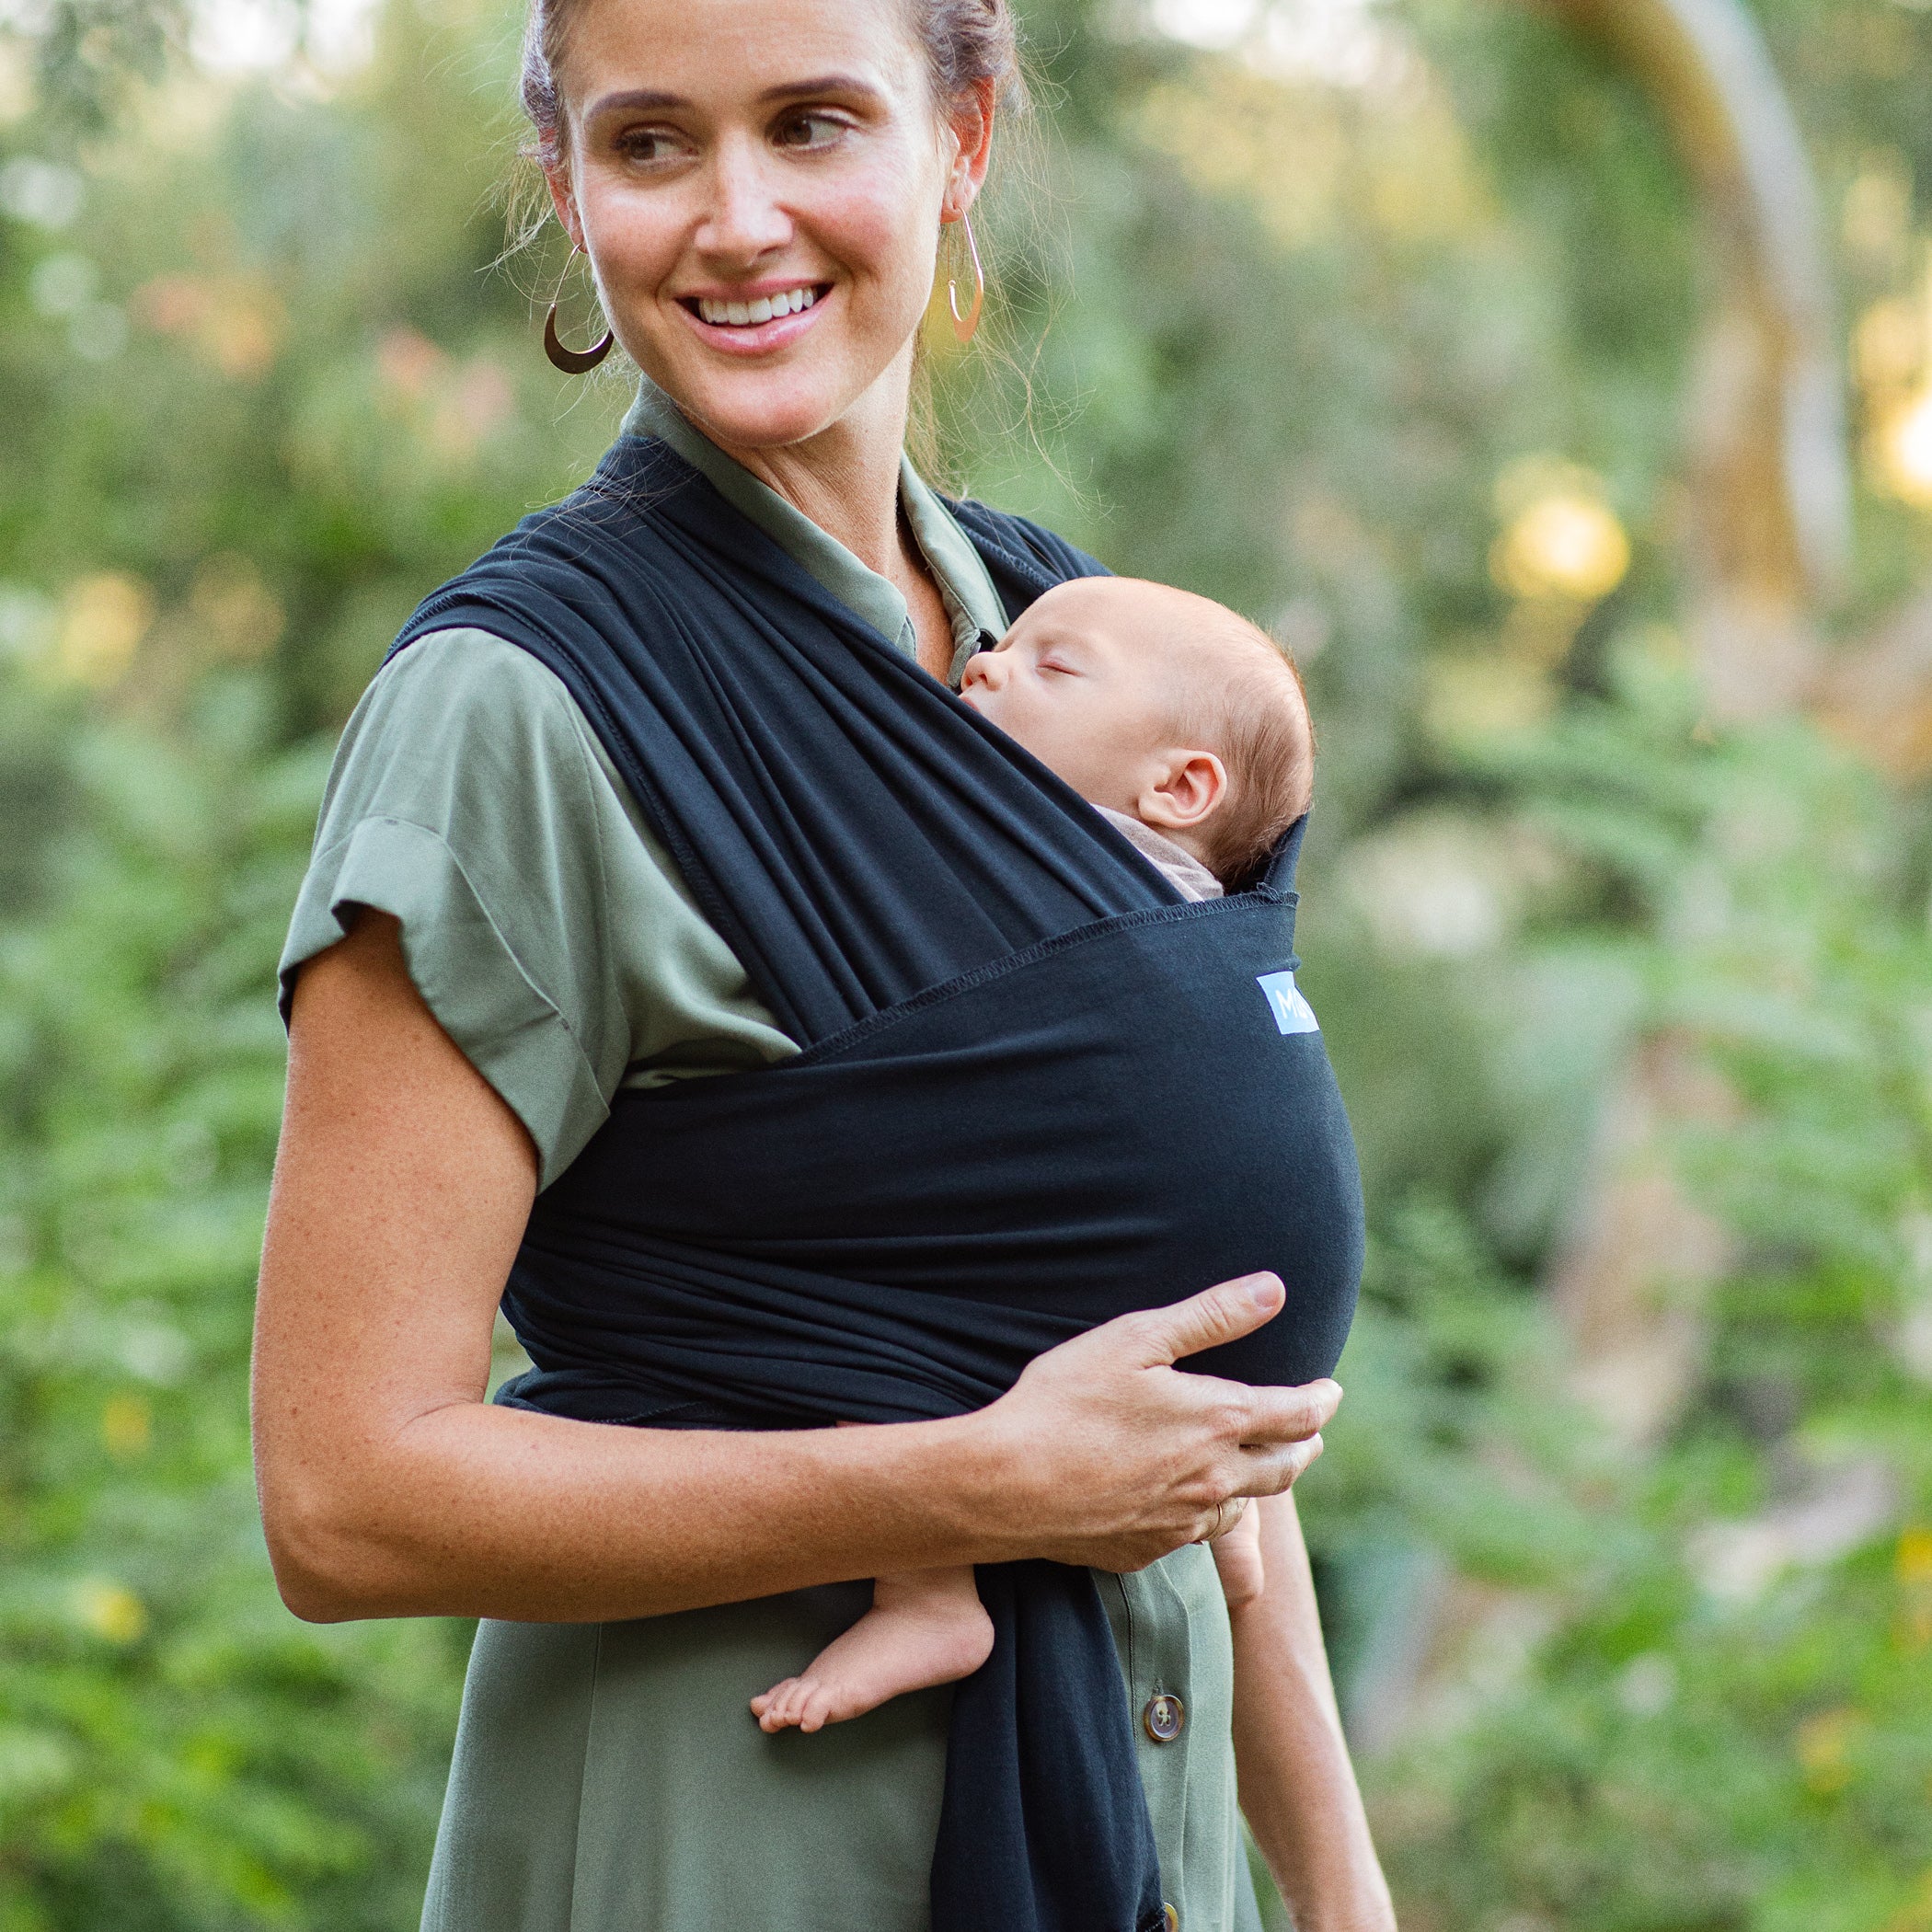 Easy-Wrap Carrier - Charcoal/Black